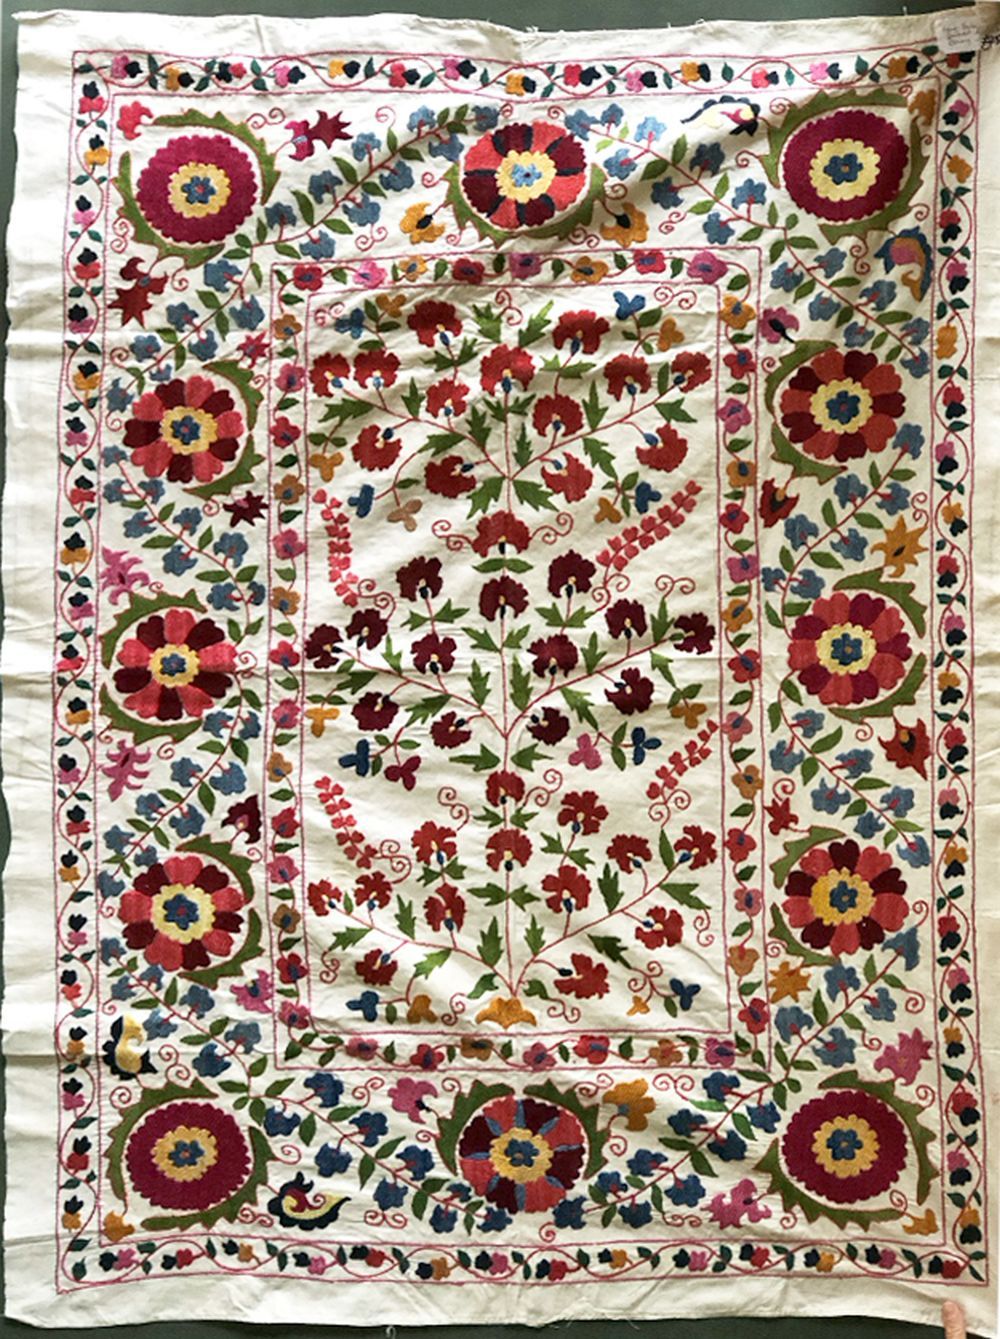 A HAND EMBROIDERED SUSANI WEDDING DOWRI, 20th Century, cream ground with stylised floral embroidery,